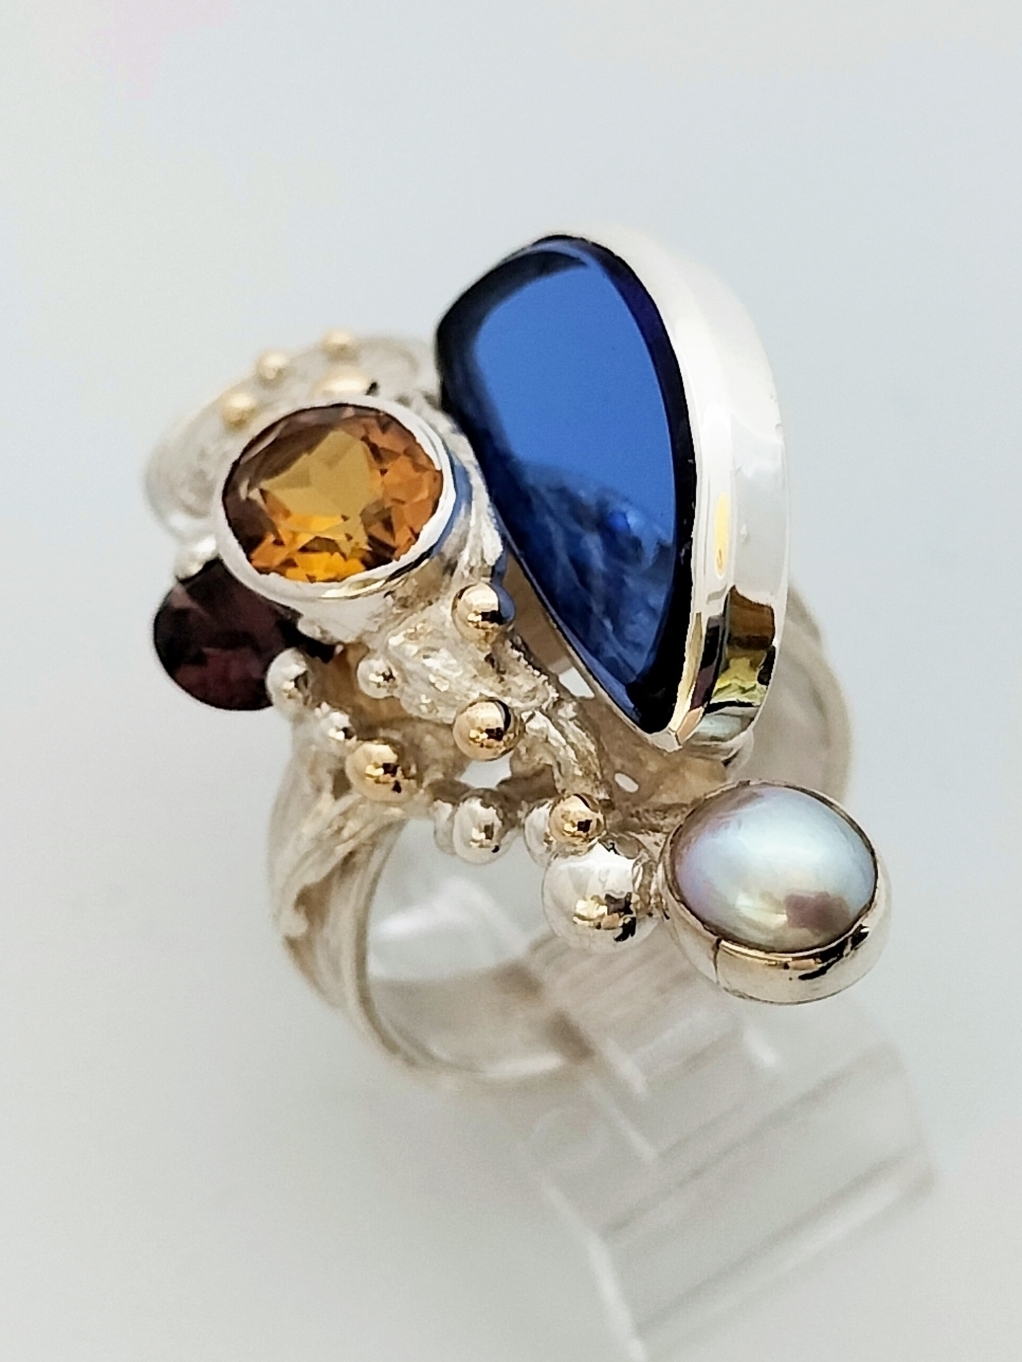 original maker's handcrafted jewellery, gregory pyra piro ring 3624, mixed metal jewelry, 14k gold and silver, sterling silver and 14 karat gold, artist with own style, unique style jewelry, silver and gemstone jewelry, gemstone and pearl jewelry, gold and color gemstone jewelry, citrine, garnet, pearl, glass, art nouveau inspired fashion jewelry, jewellery with natural pearls and semi precious stones, contemporary jewelry from silver and gold, art jewellery with colour stones, contemporary jewelry with pearls and color stones, jewellery made from silver and gold with natural pearls and natural gemstones, shopping for diamonds and designer jewellery, accessories with color stones and pearls, artisan handcrafted jewellery with natural gemstones and natural pearls, jewelry made first hand, art and craft gallery artisan handcrafted jewellery for sale, jewellery with ocean and seashell theme